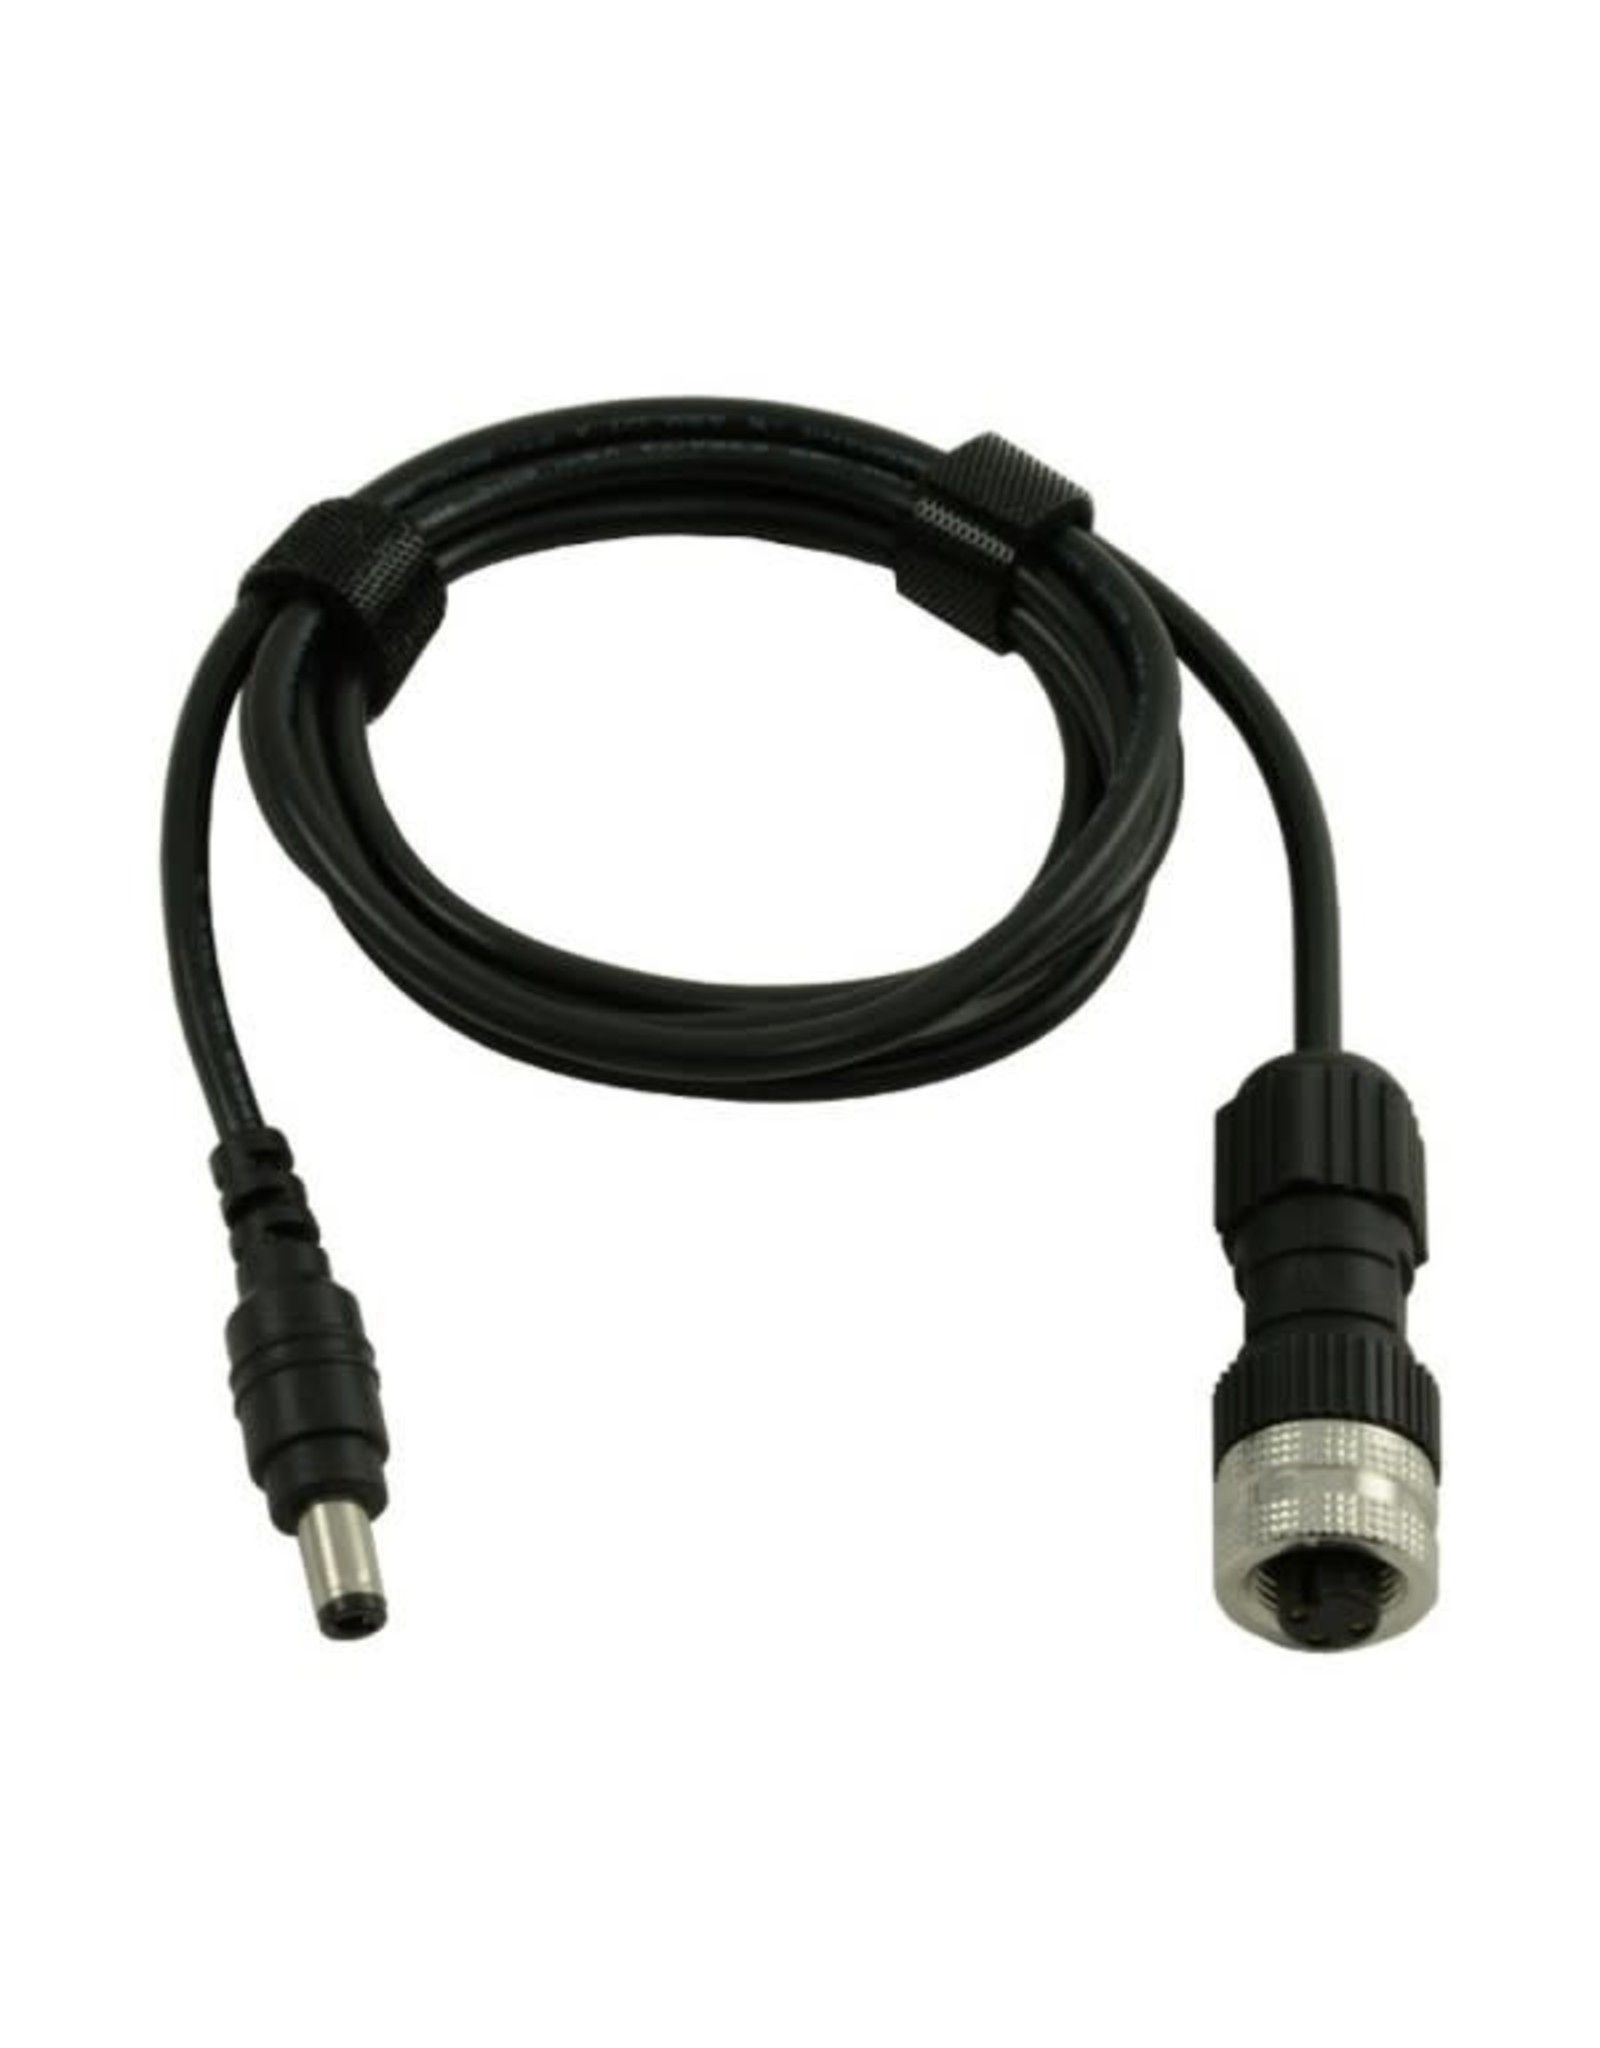 PrimaLuceLab Primaluce Eagle-compatible power cable with 5.5 - 2.1 connector - 115cm for 3A port